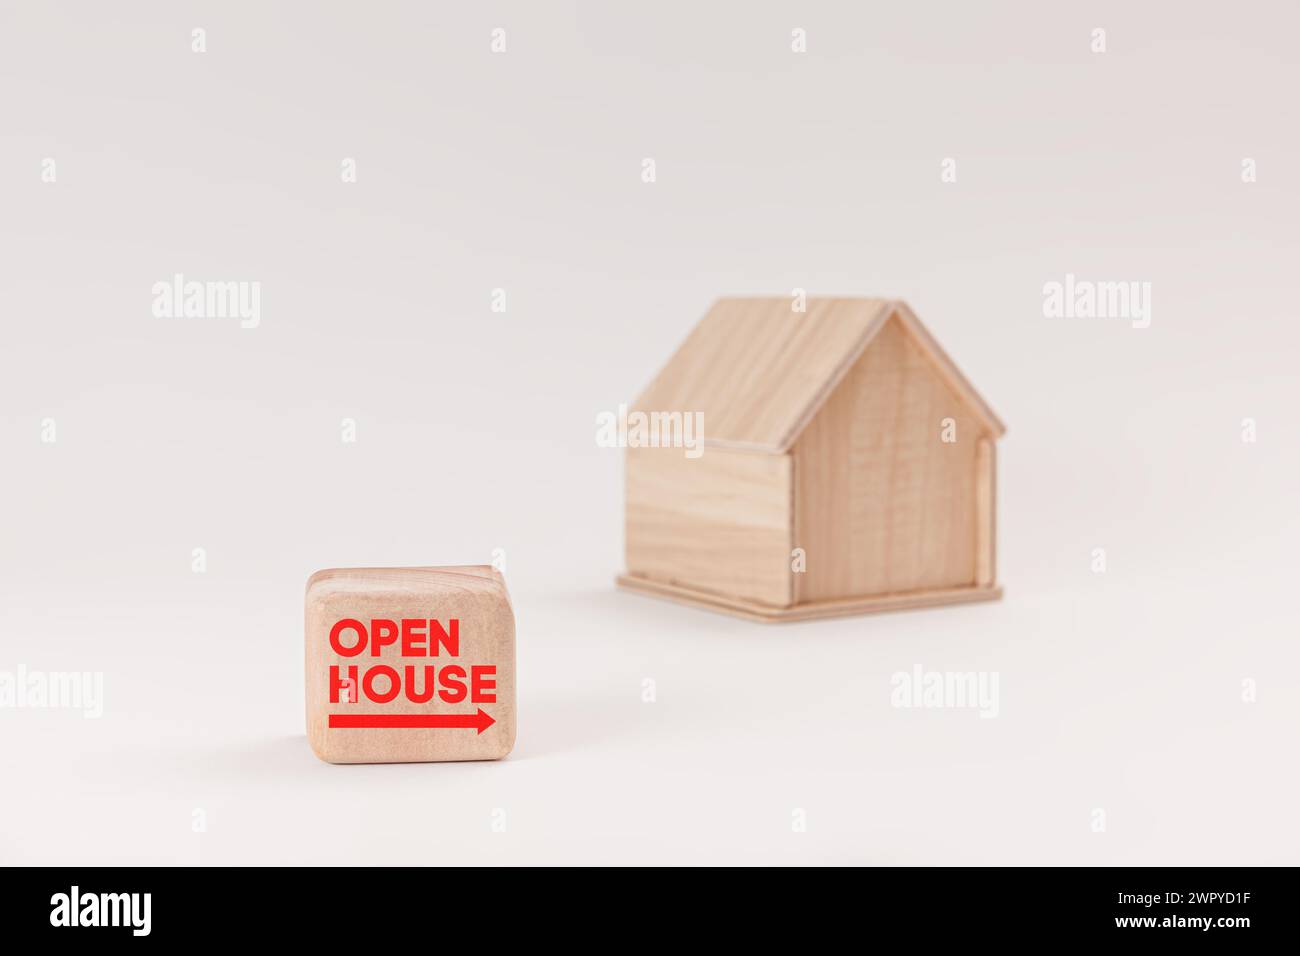 Simplistic wooden house model isolated on pale green background, with text Open House on signboard. Stock Photo